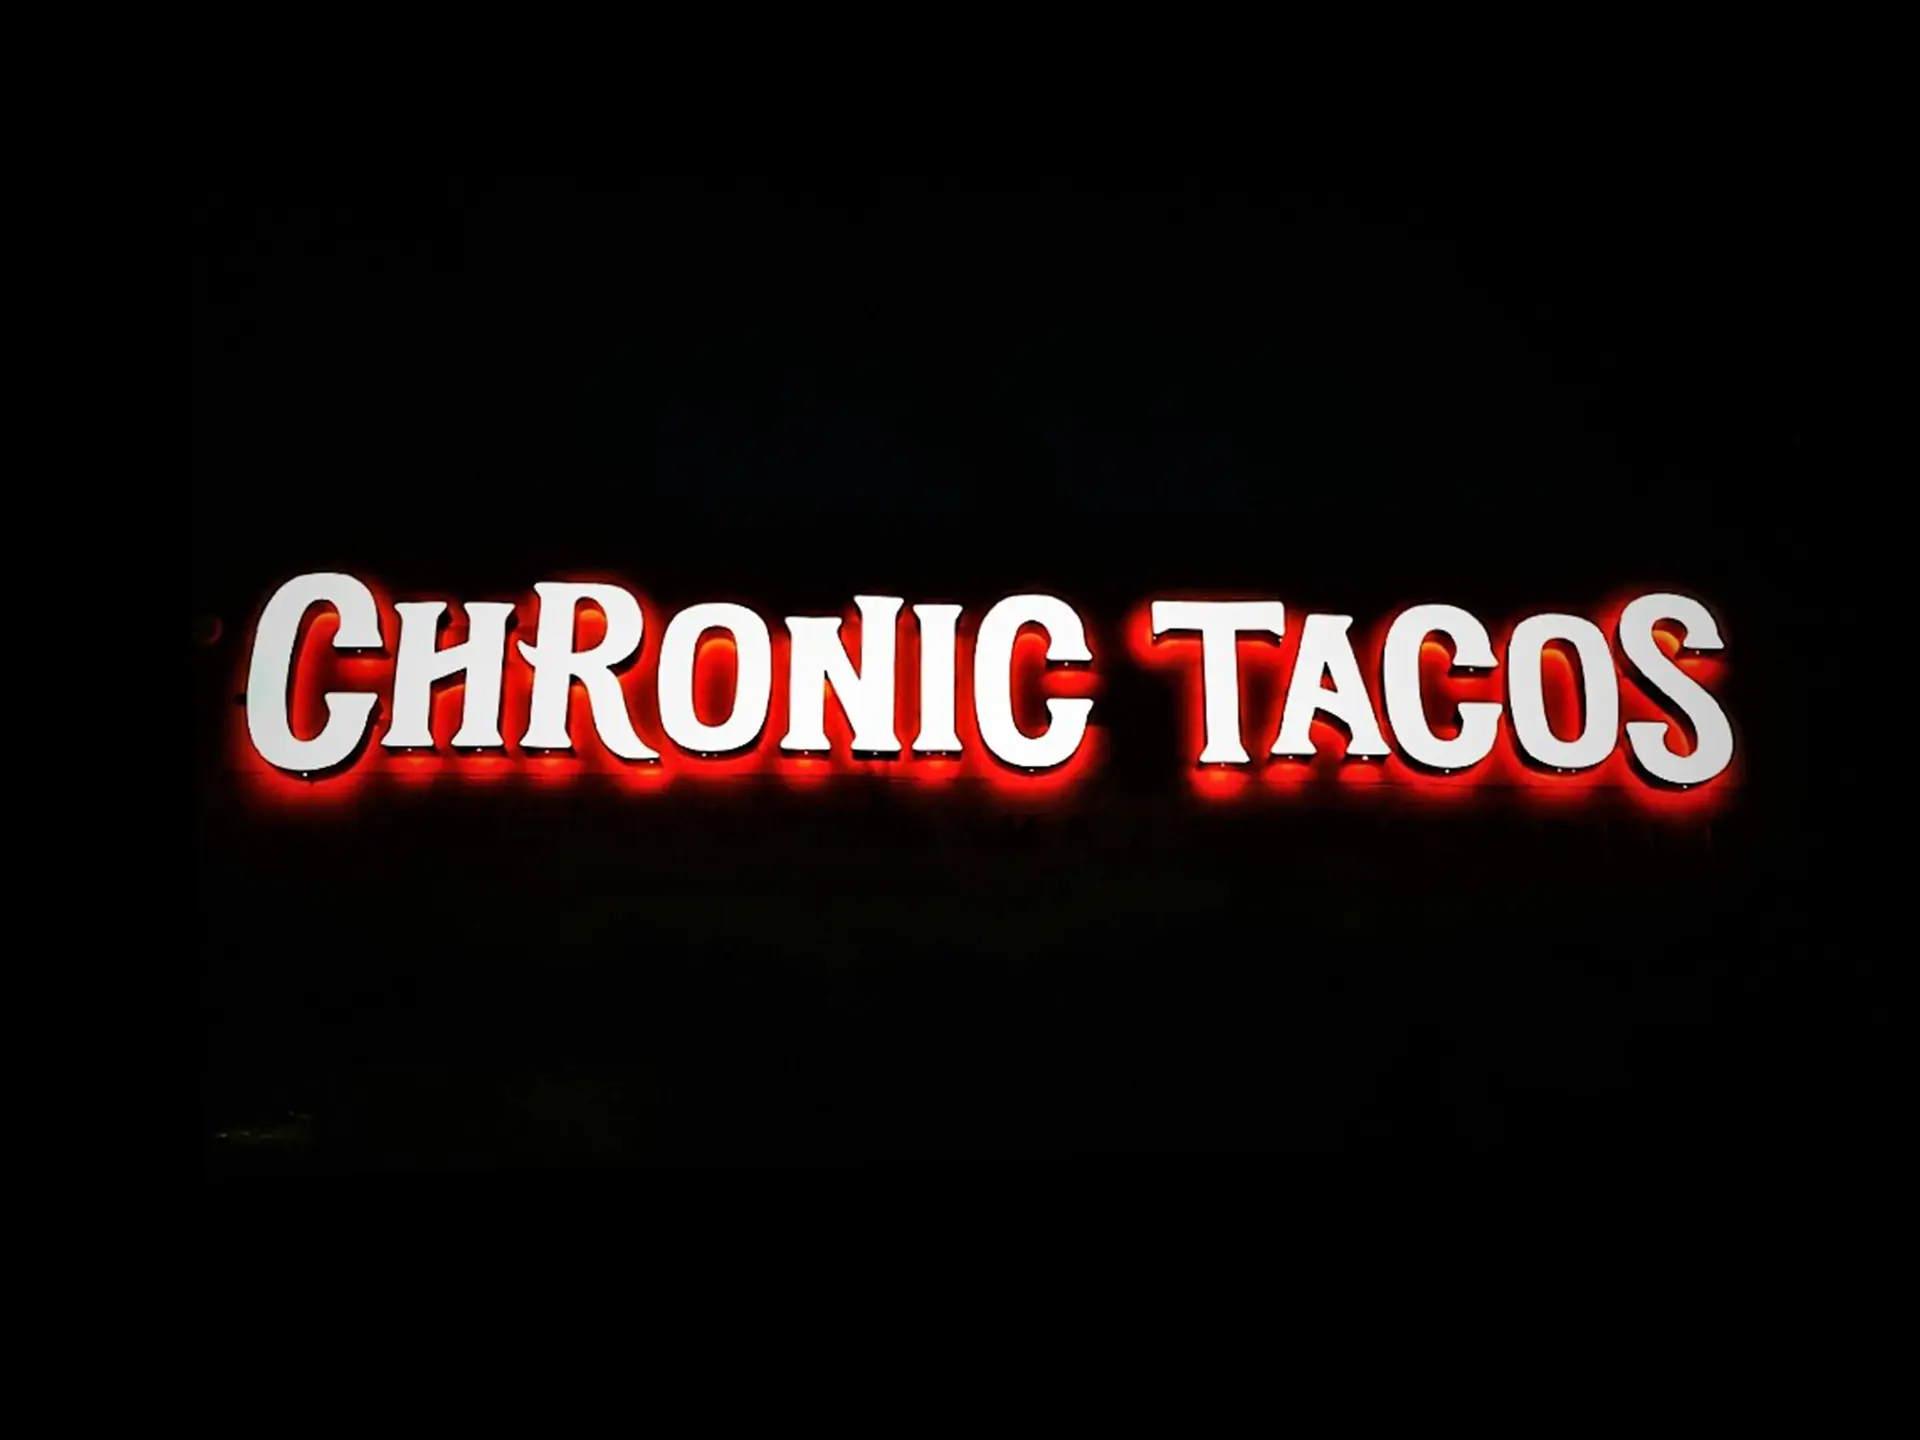 A storefront sign for a taco restaurant